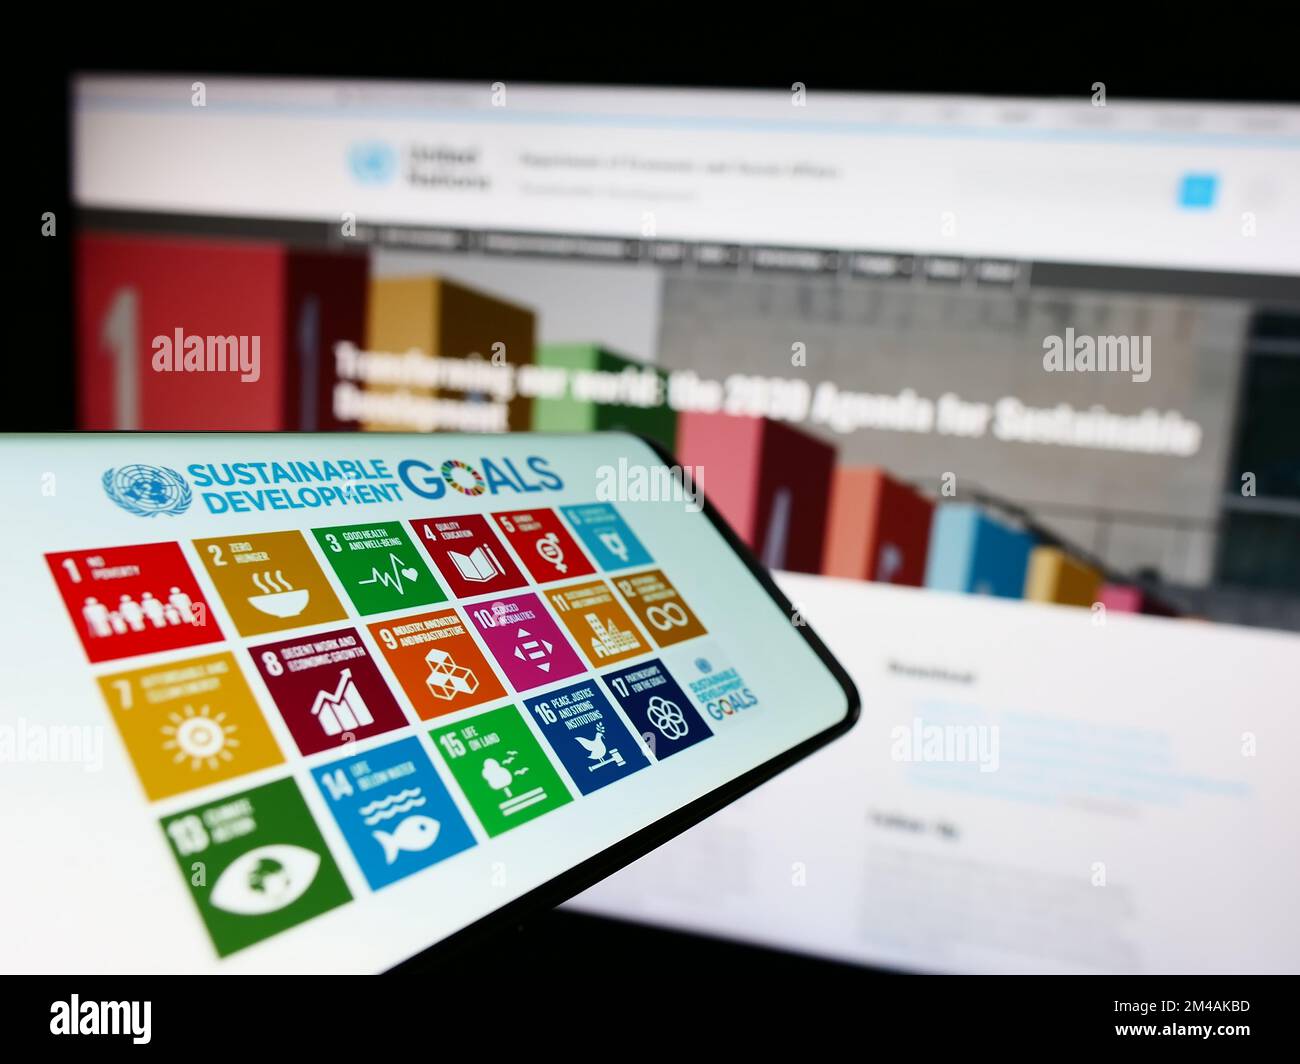 Smartphone with logo of UN Sustainable Development Goals (SDG) on screen in front of website. Focus on center-right of phone display. Stock Photo